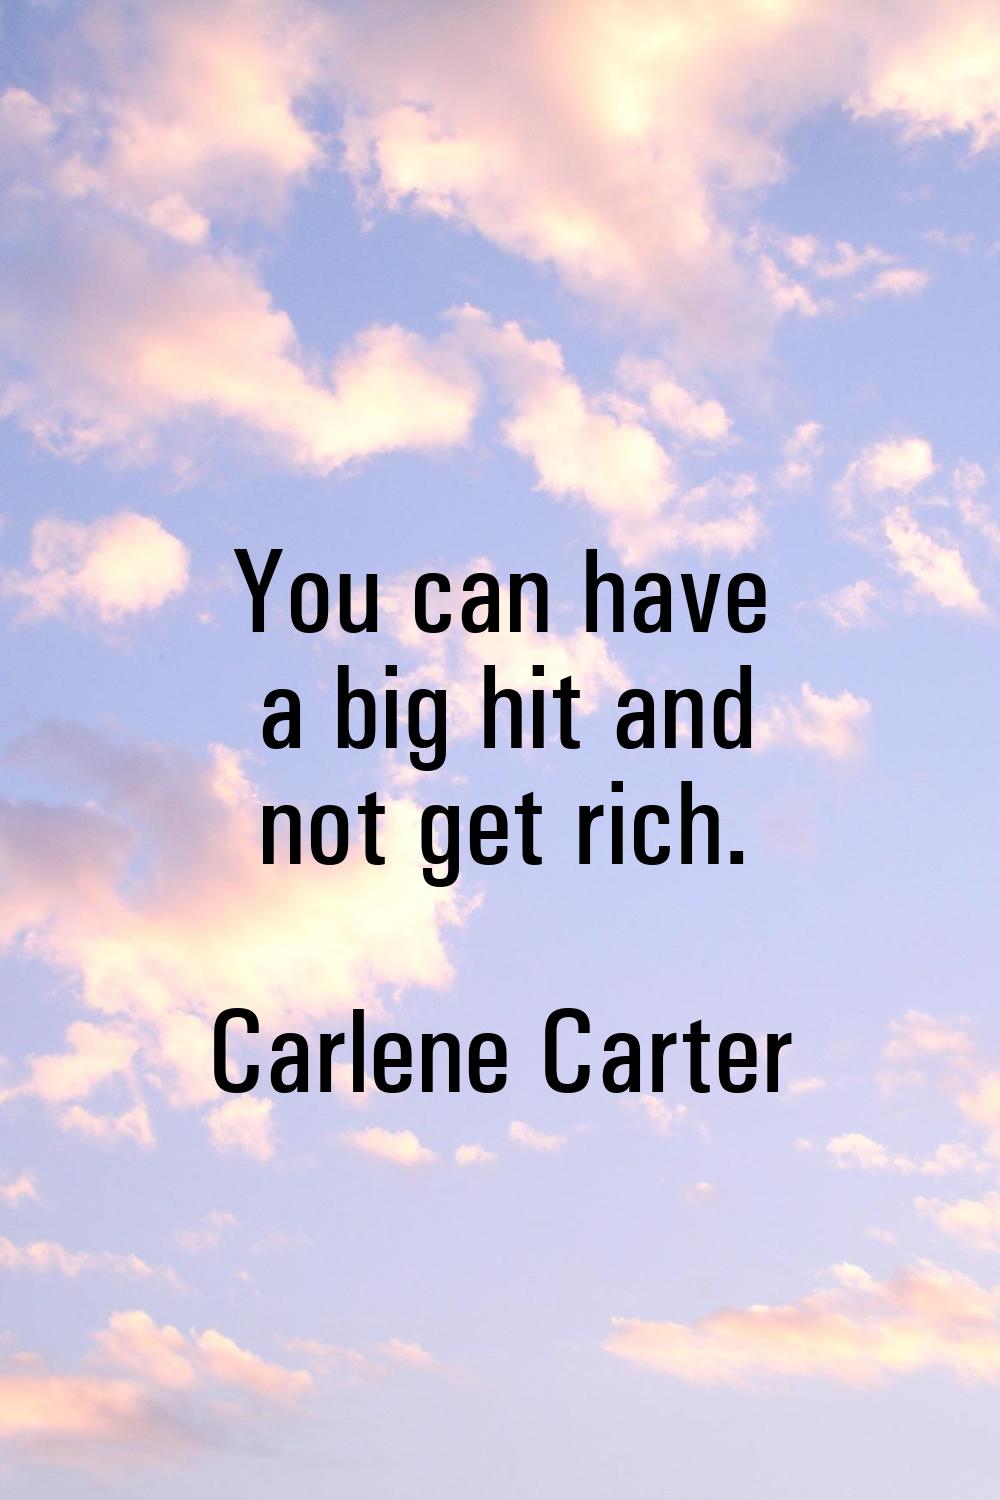 You can have a big hit and not get rich.